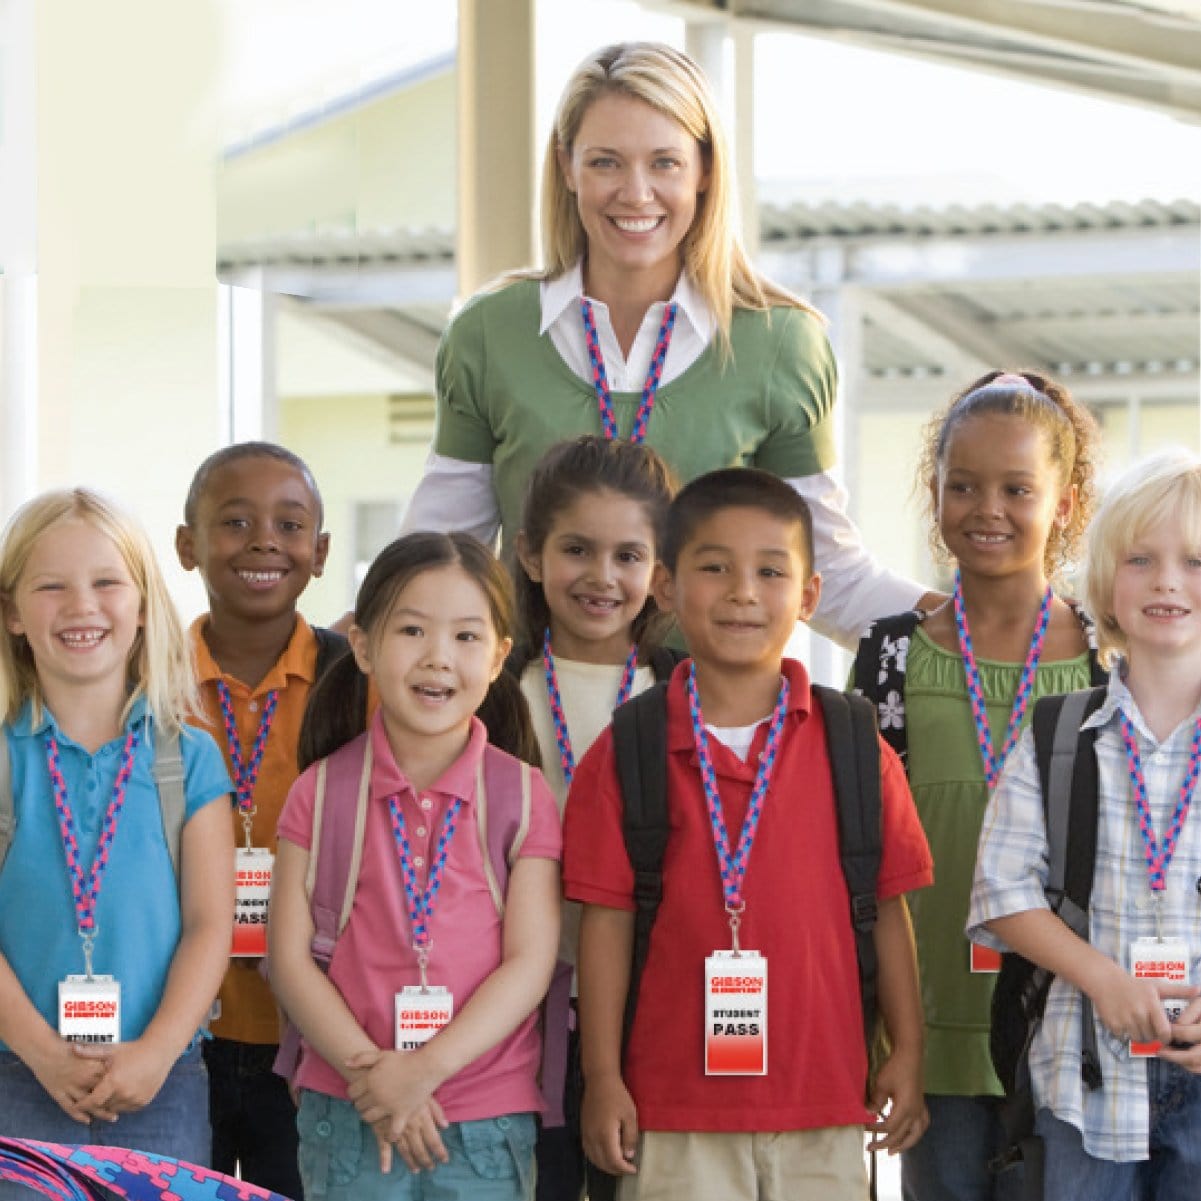 A woman stands behind a group of seven smiling children, all wearing visitor passes attached to Autism Awareness Flat Breakaway Lanyard With Swivel Hook (2138-5281, 2138-5282) and backpacks, in an outdoor setting.